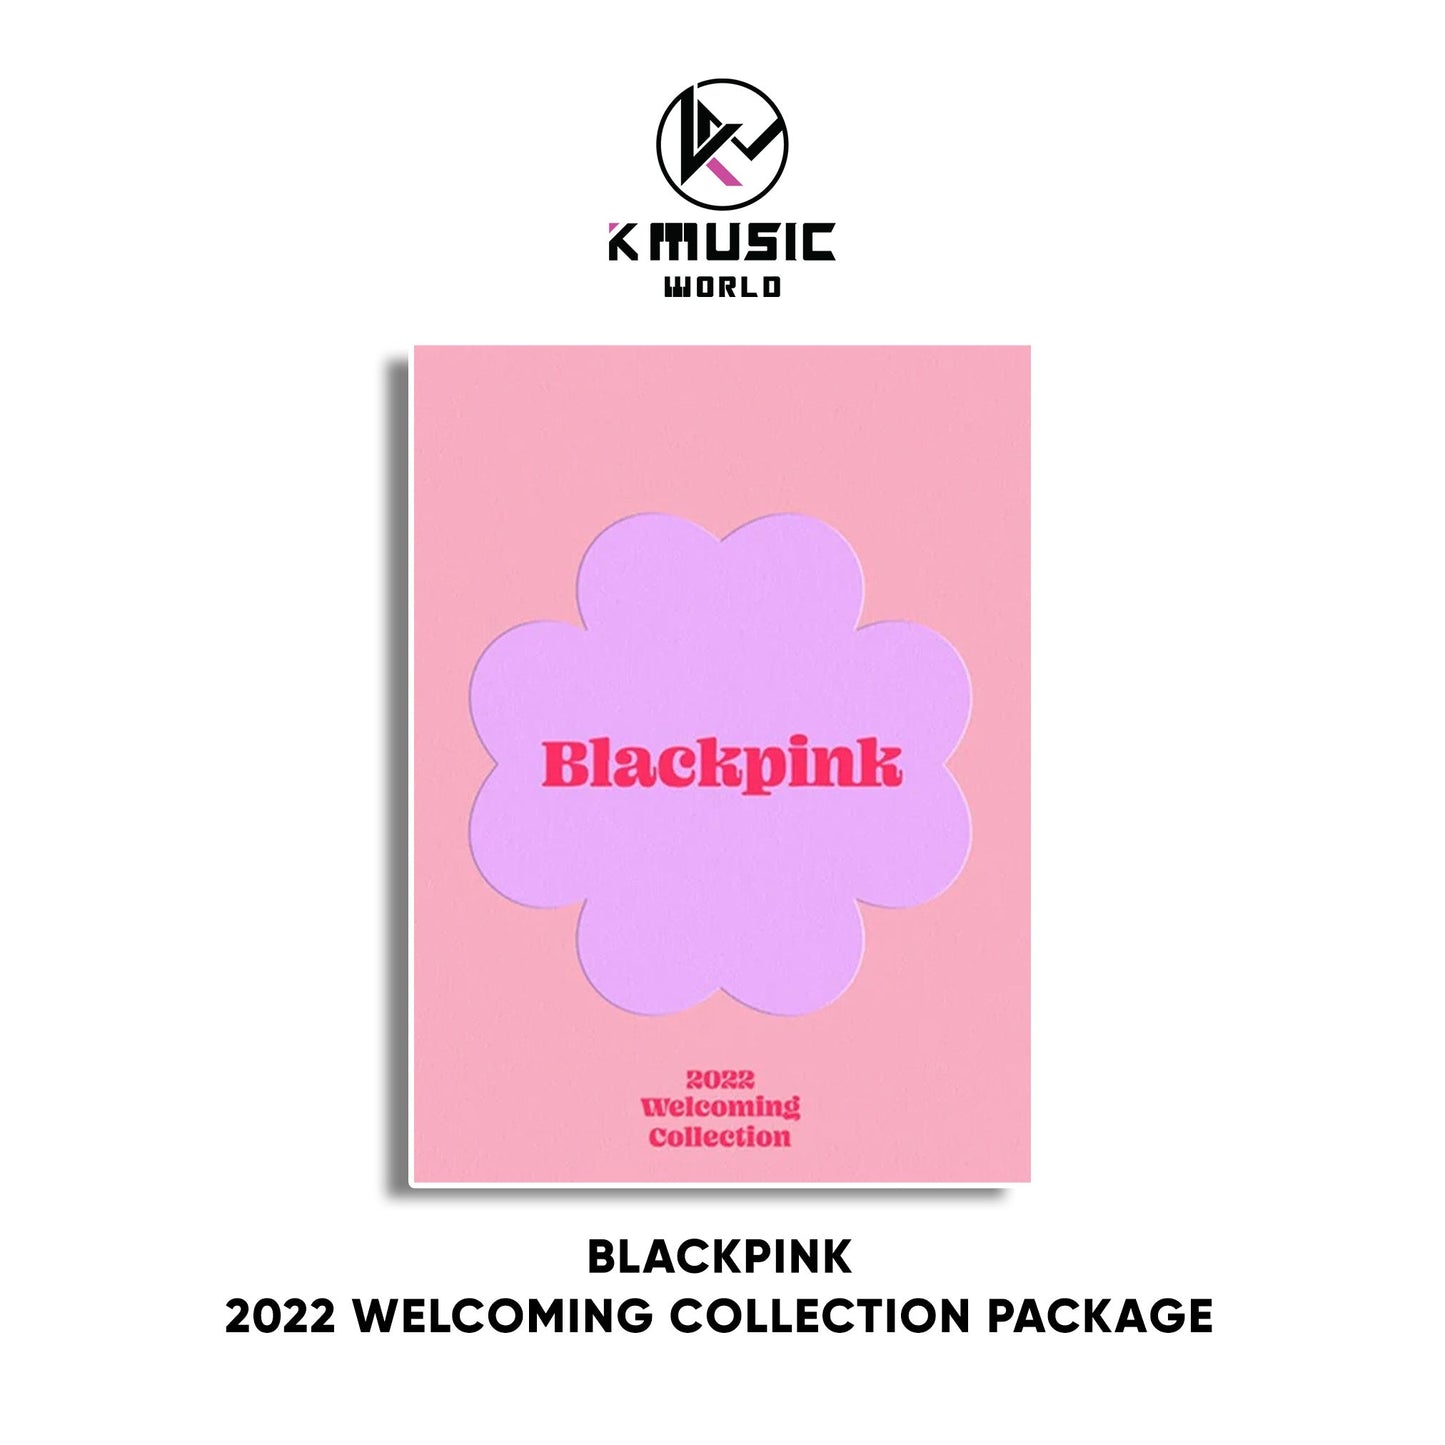 BLACKPINK - 2022 Welcoming Collection Package